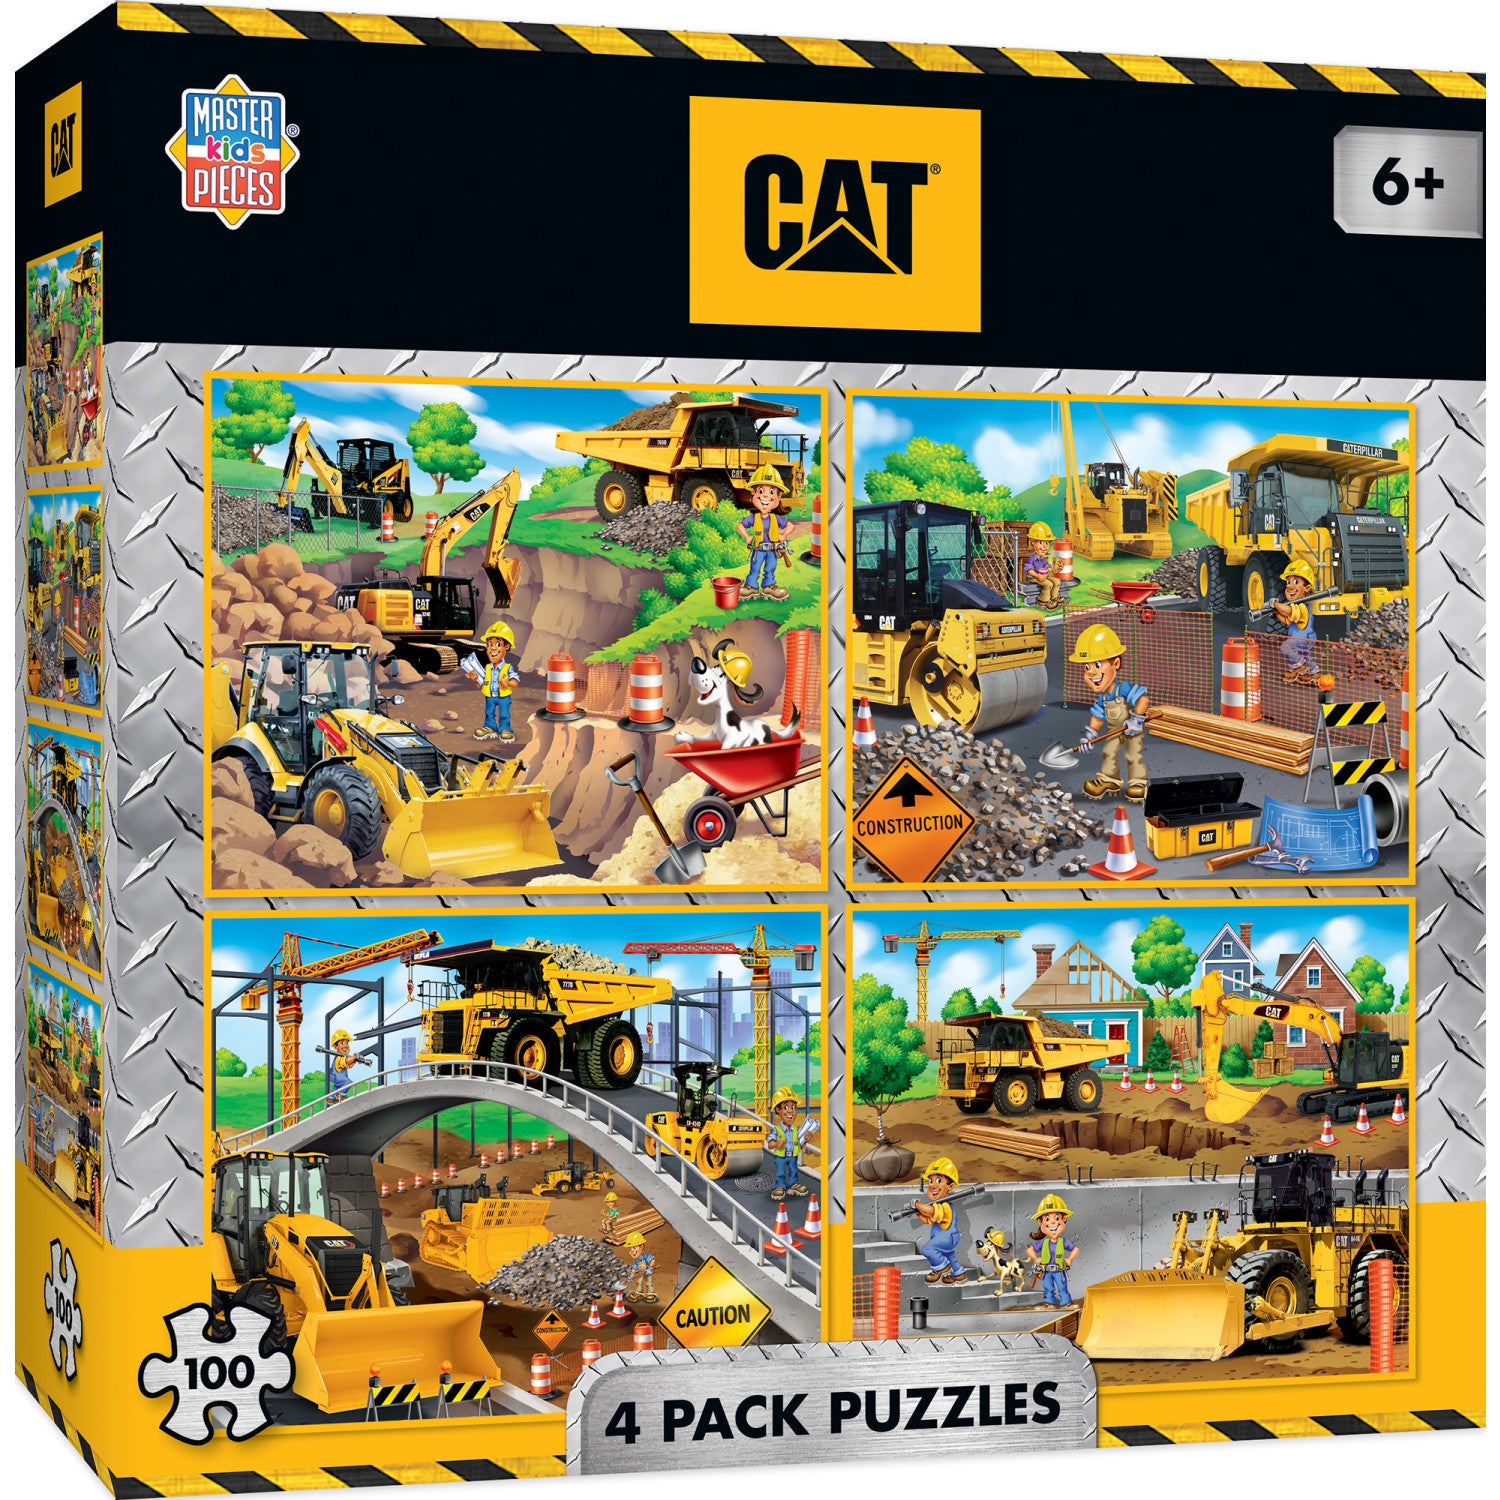 6 CHILDREN'S PUZZLE PACK-PUZZLES New in Box- Great assortment of